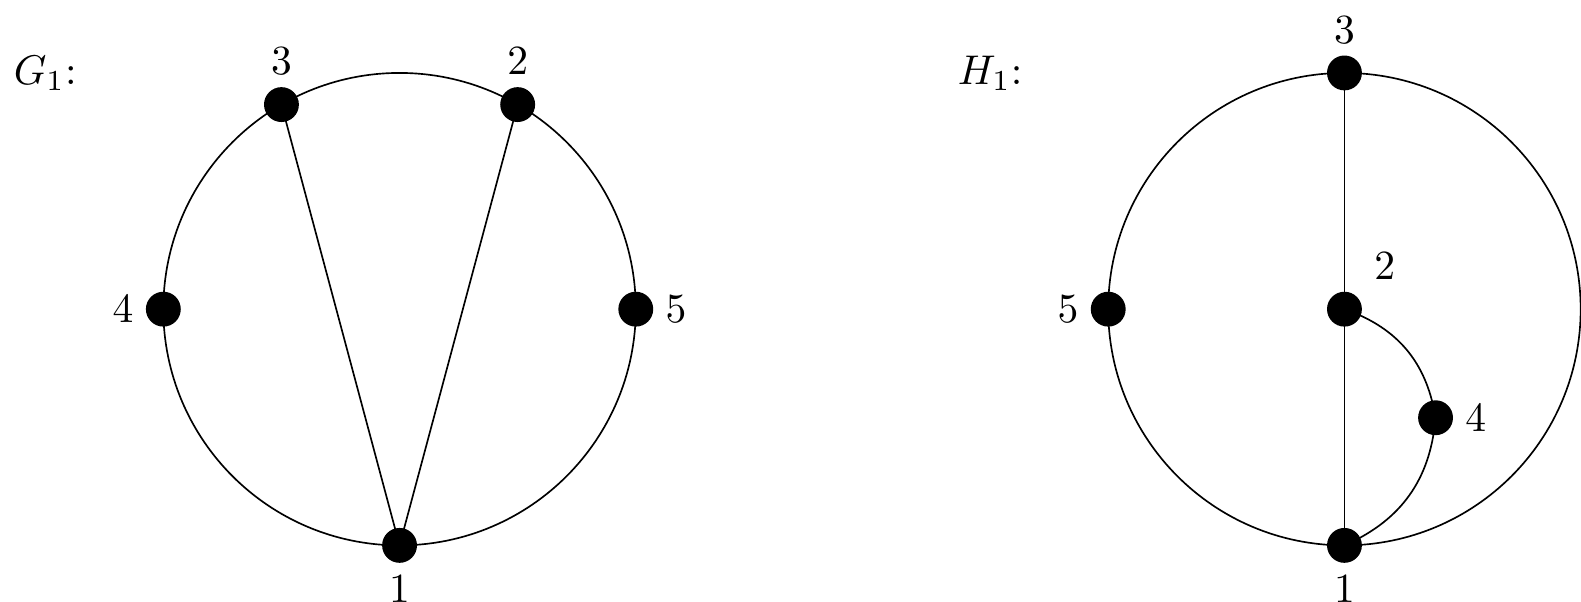 Two graphs on five vertices. Each arranged loosely into a circular formation but vertices drawn in different locations. An edge by edge description of the graphs would reveal they are identical.